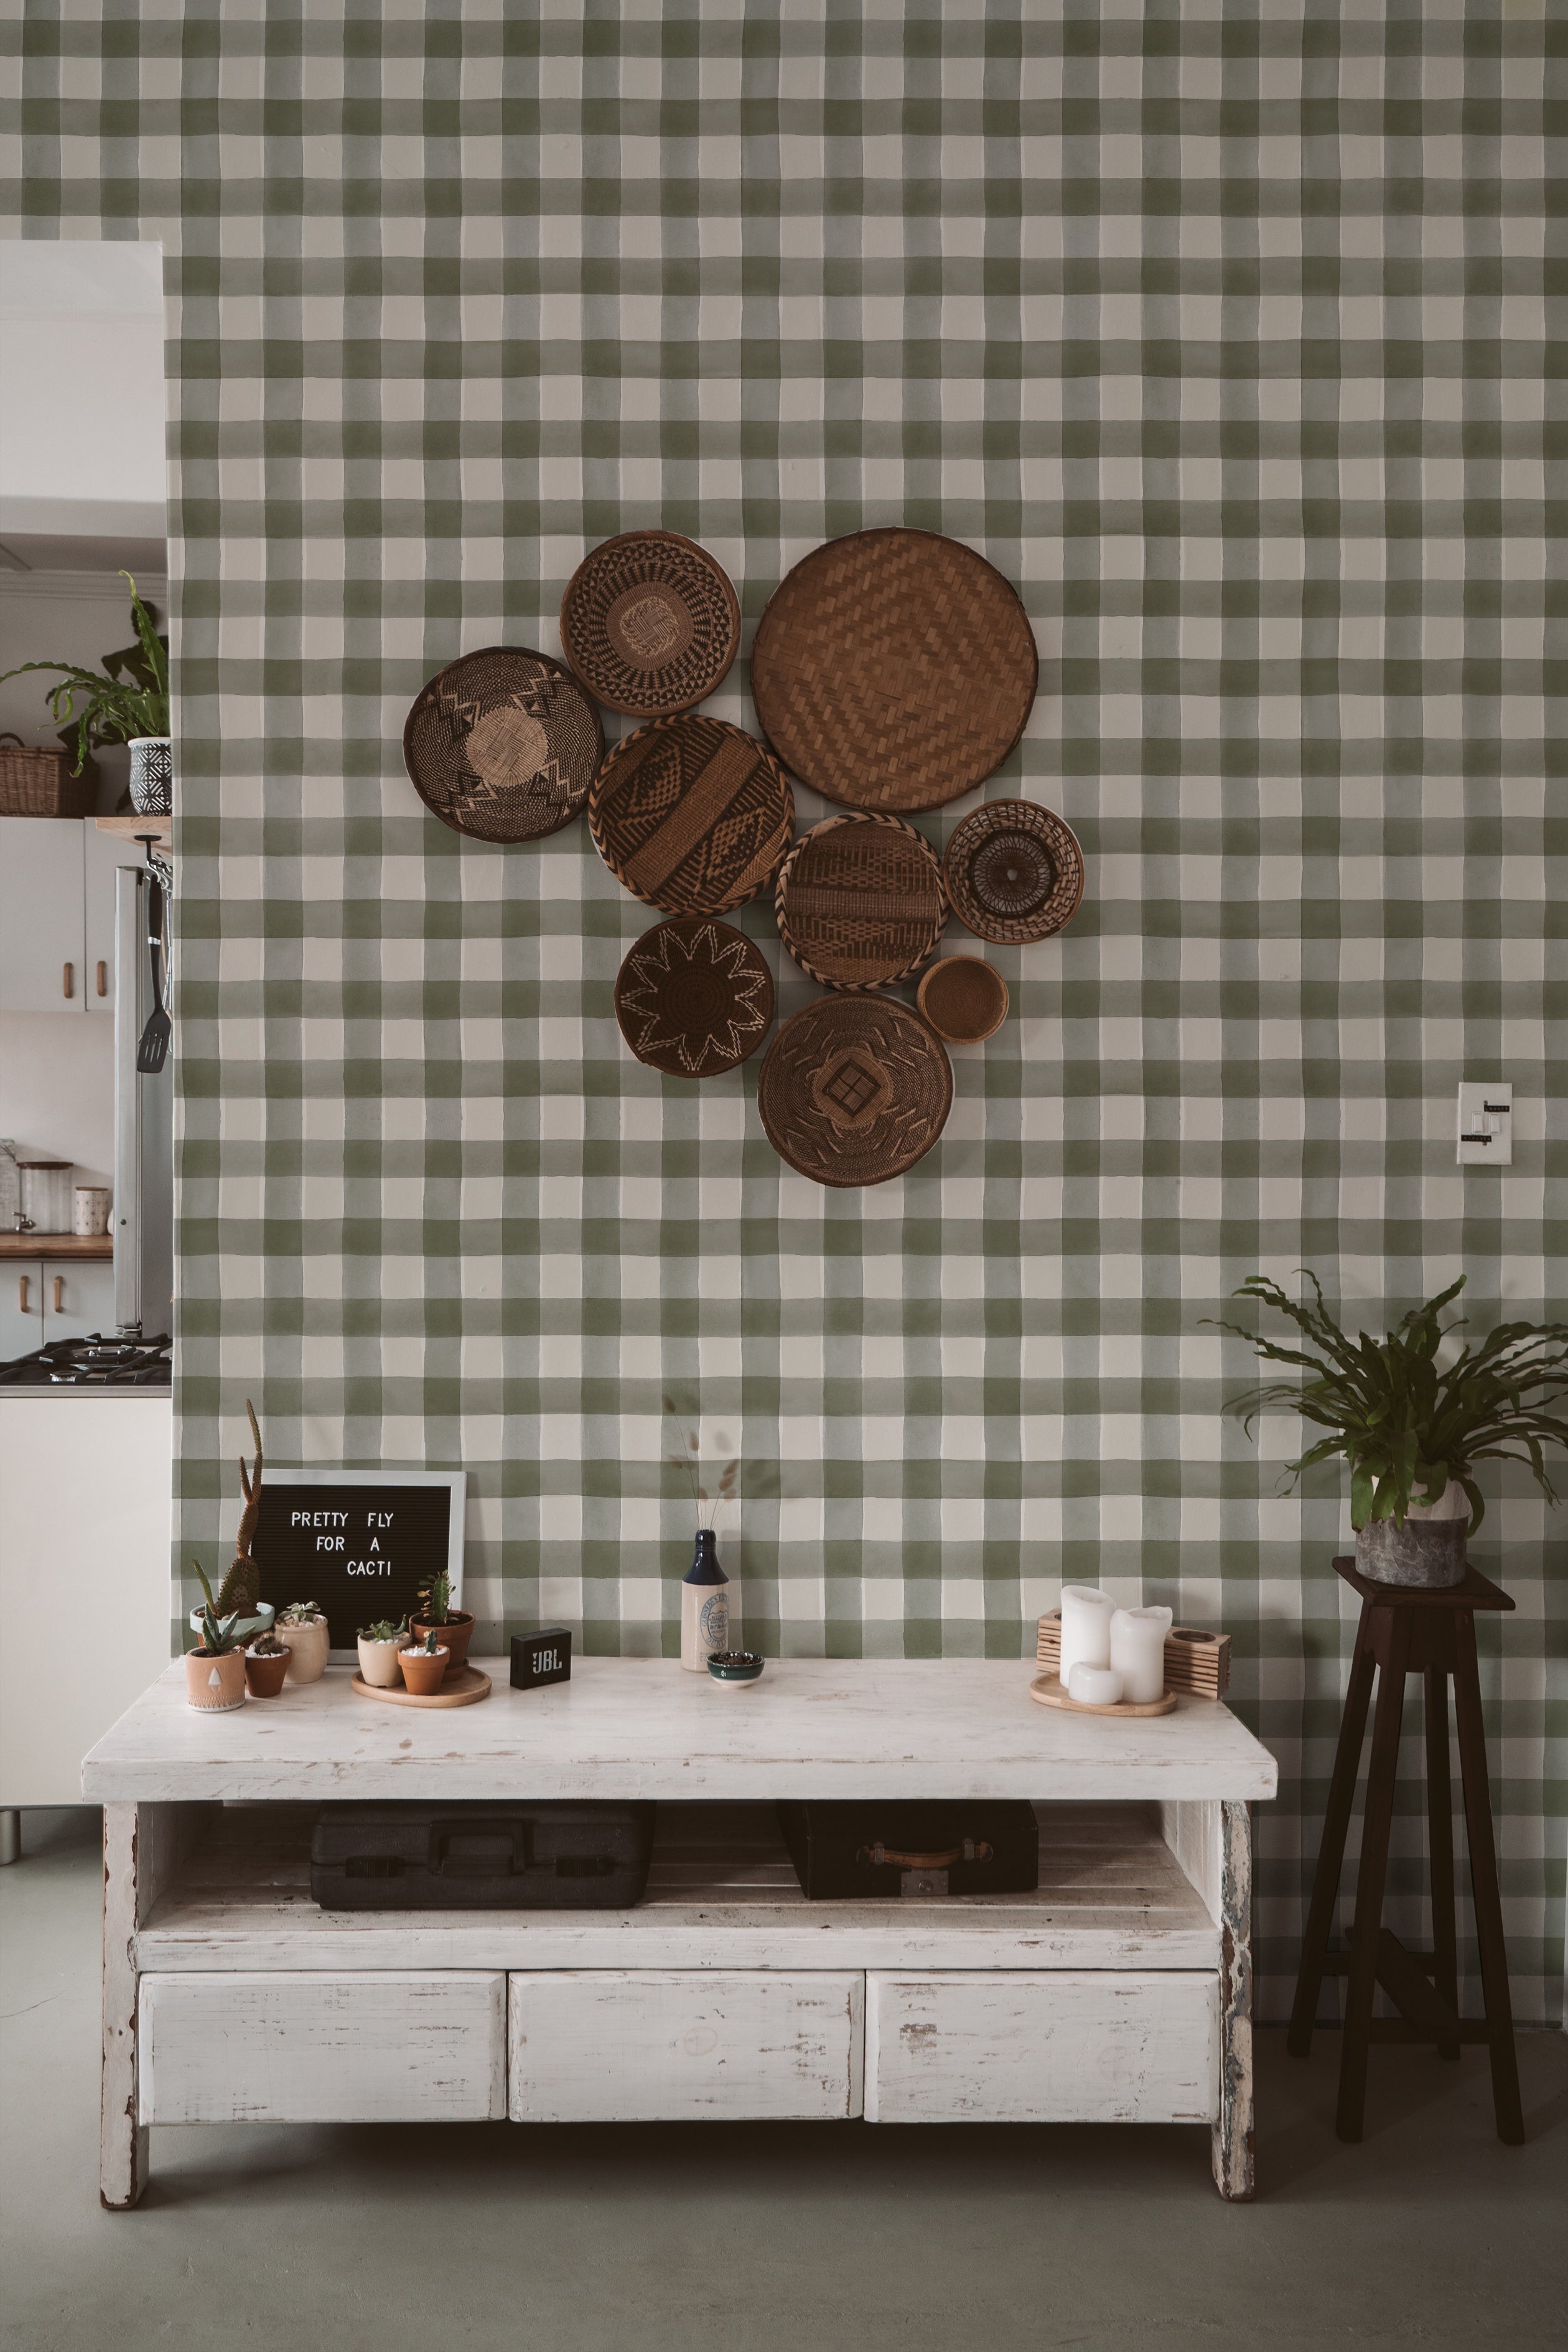 A contemporary kitchen scene with a wall adorned in Cuadro de Búfalo wallpaper featuring a refreshing green and white buffalo check pattern. The scene is decorated with a rustic white table, assorted woven baskets, and small potted plants, creating a vibrant and homey atmosphere.